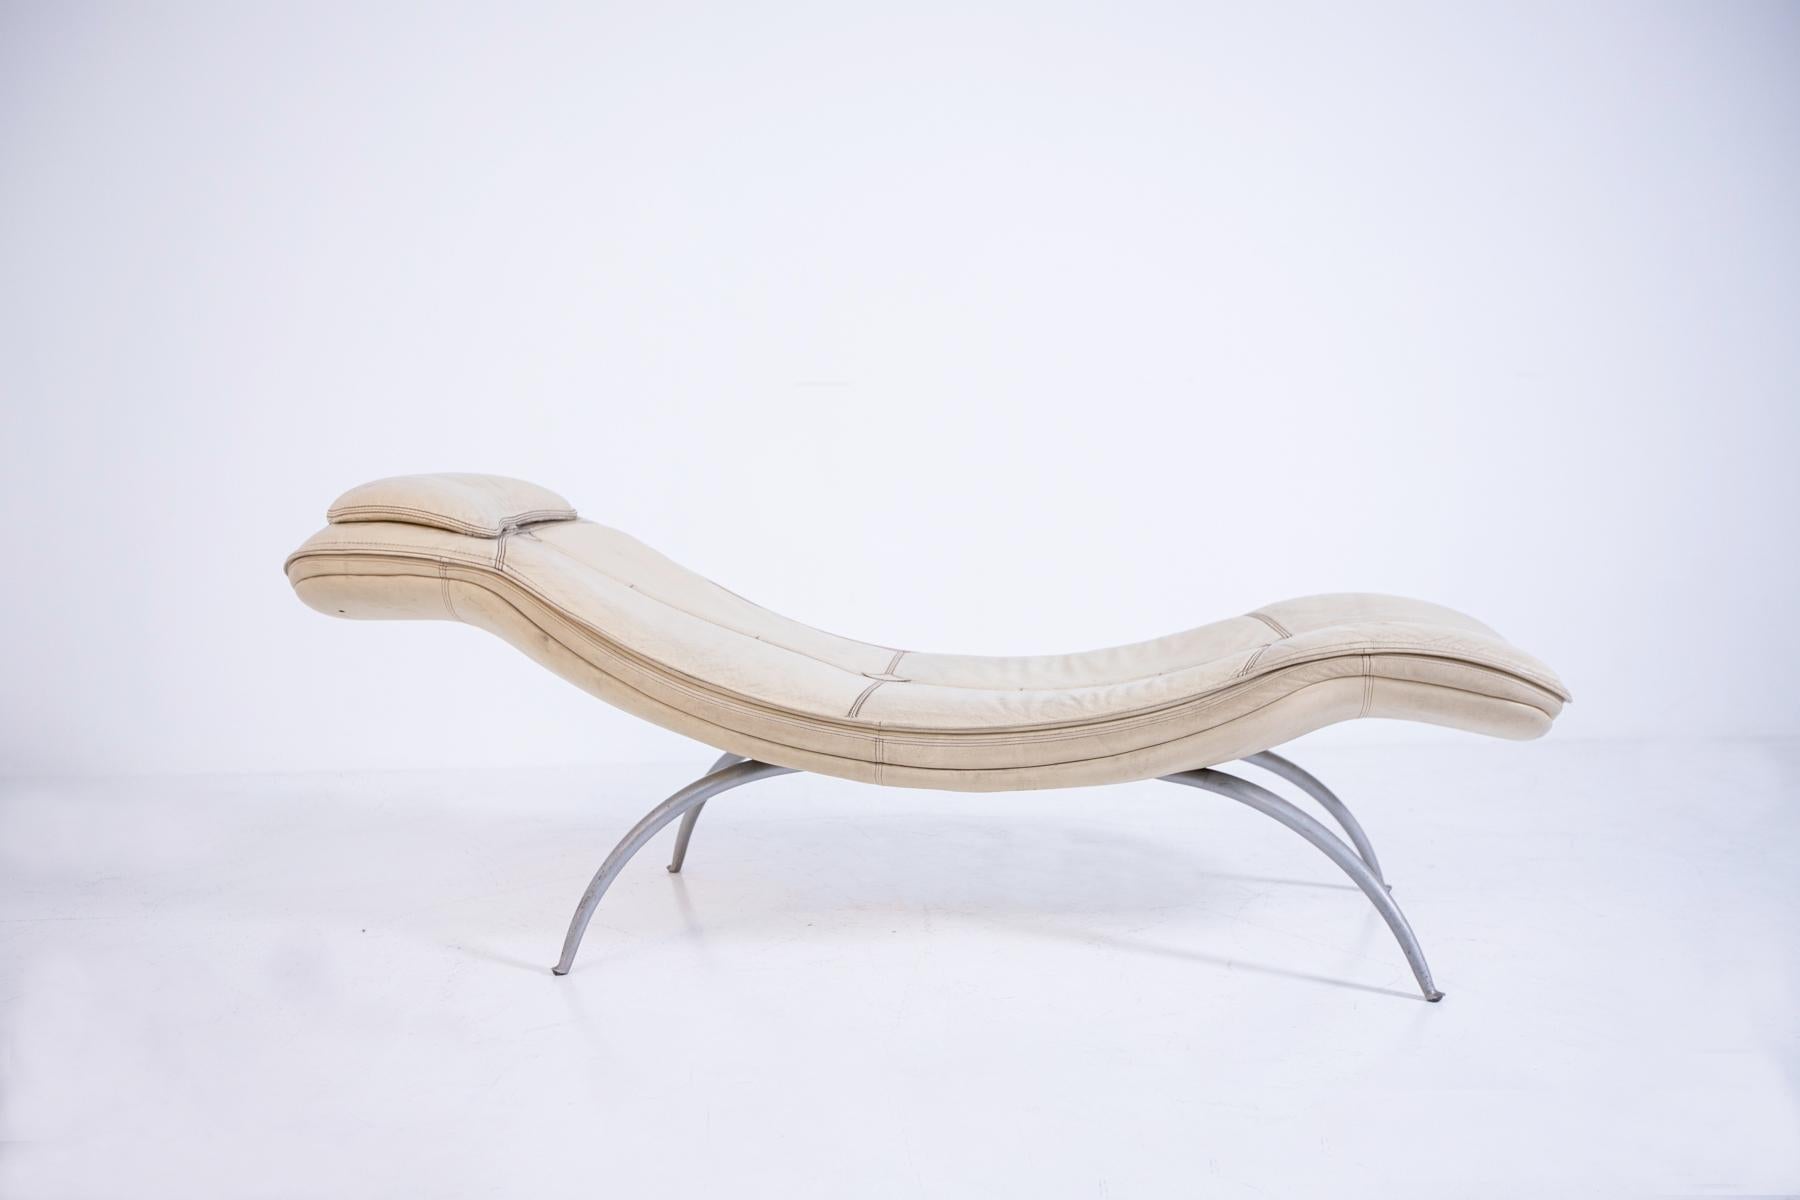 Very comfortable ivory colored chaise longue finely made by Moroso in 1970.
The chaise longue by Moroso has been realized with precious materials, leather for the cover and iron for the structure. Conical feet and soft curved lines characterize the